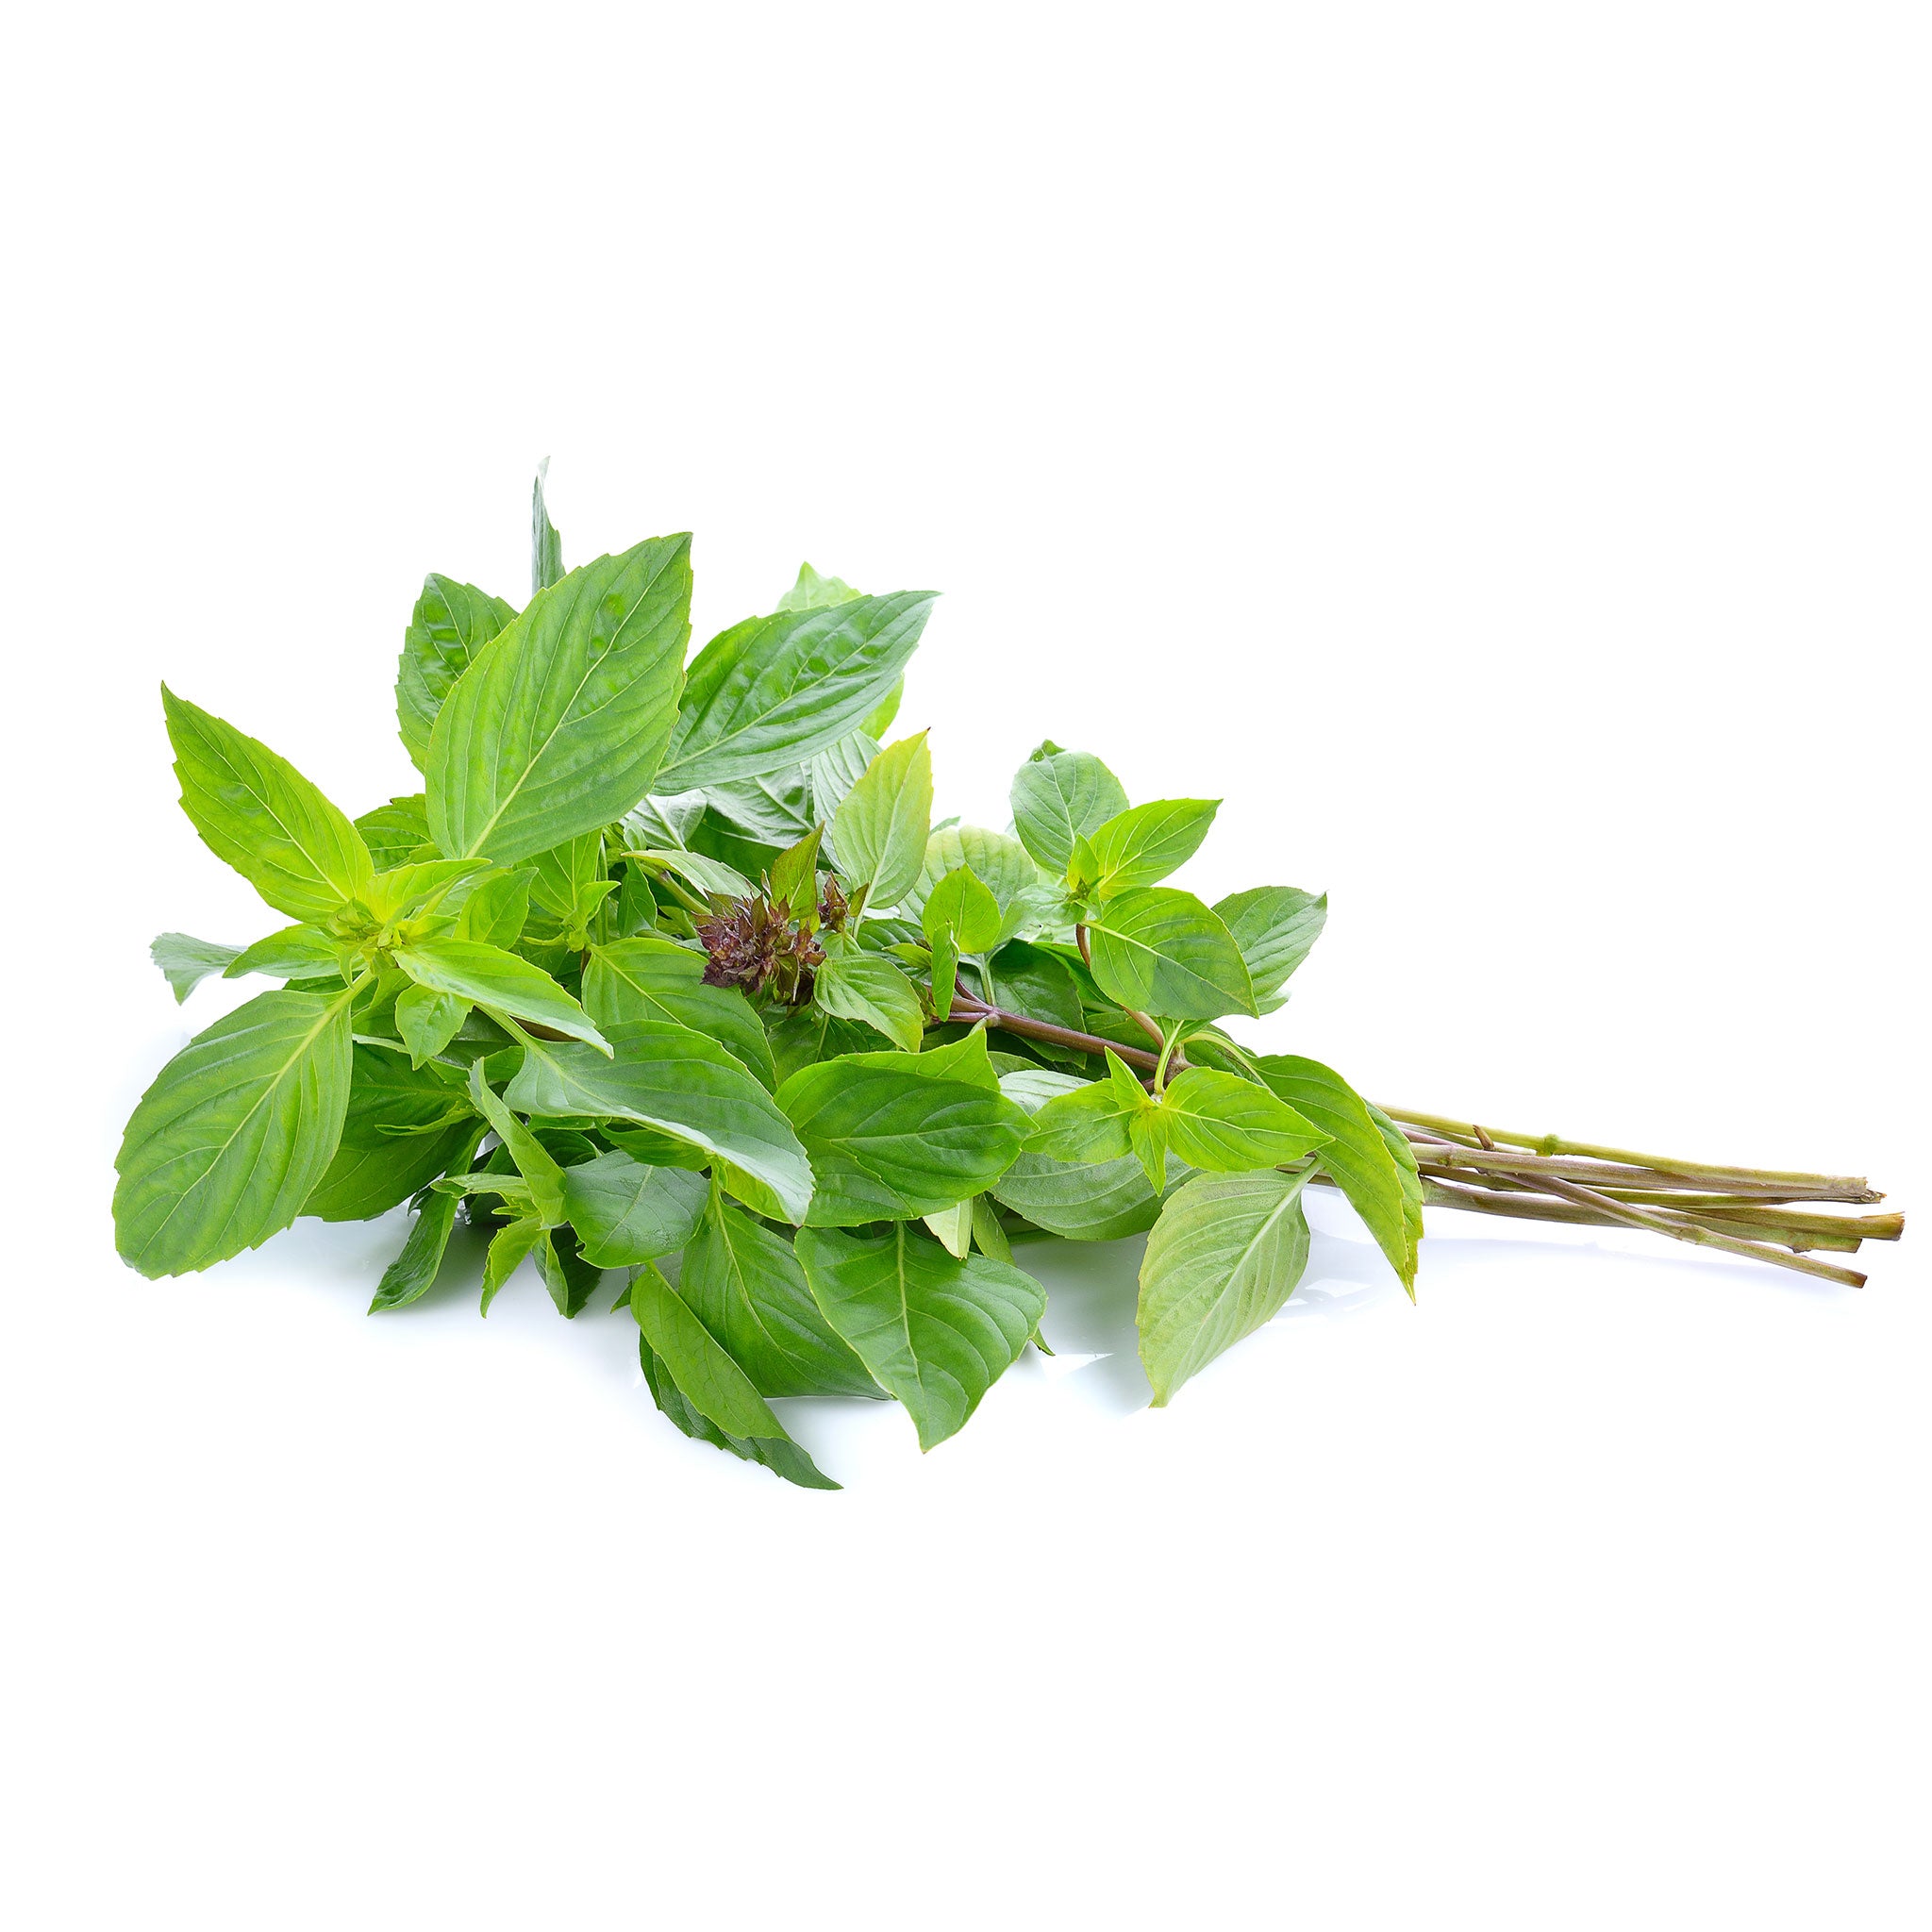 Fresh Thai Sweet Basil Herbs 100g - Imported Weekly from Thailand